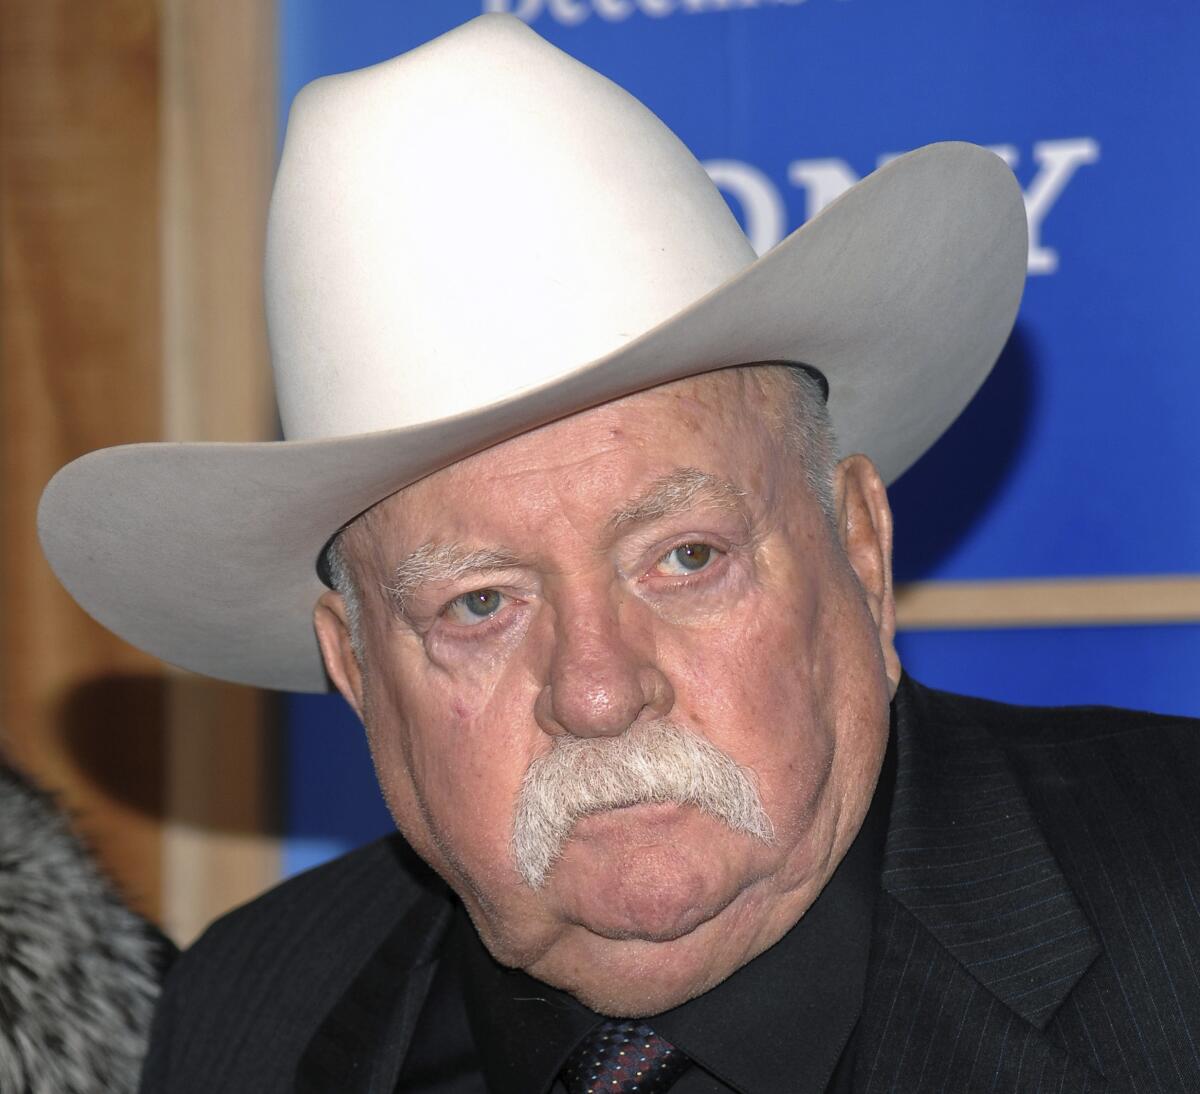 Wilford Brimley, who worked his way up from stunt performer to star of film such as “Cocoon” and “The Natural,” has died. 